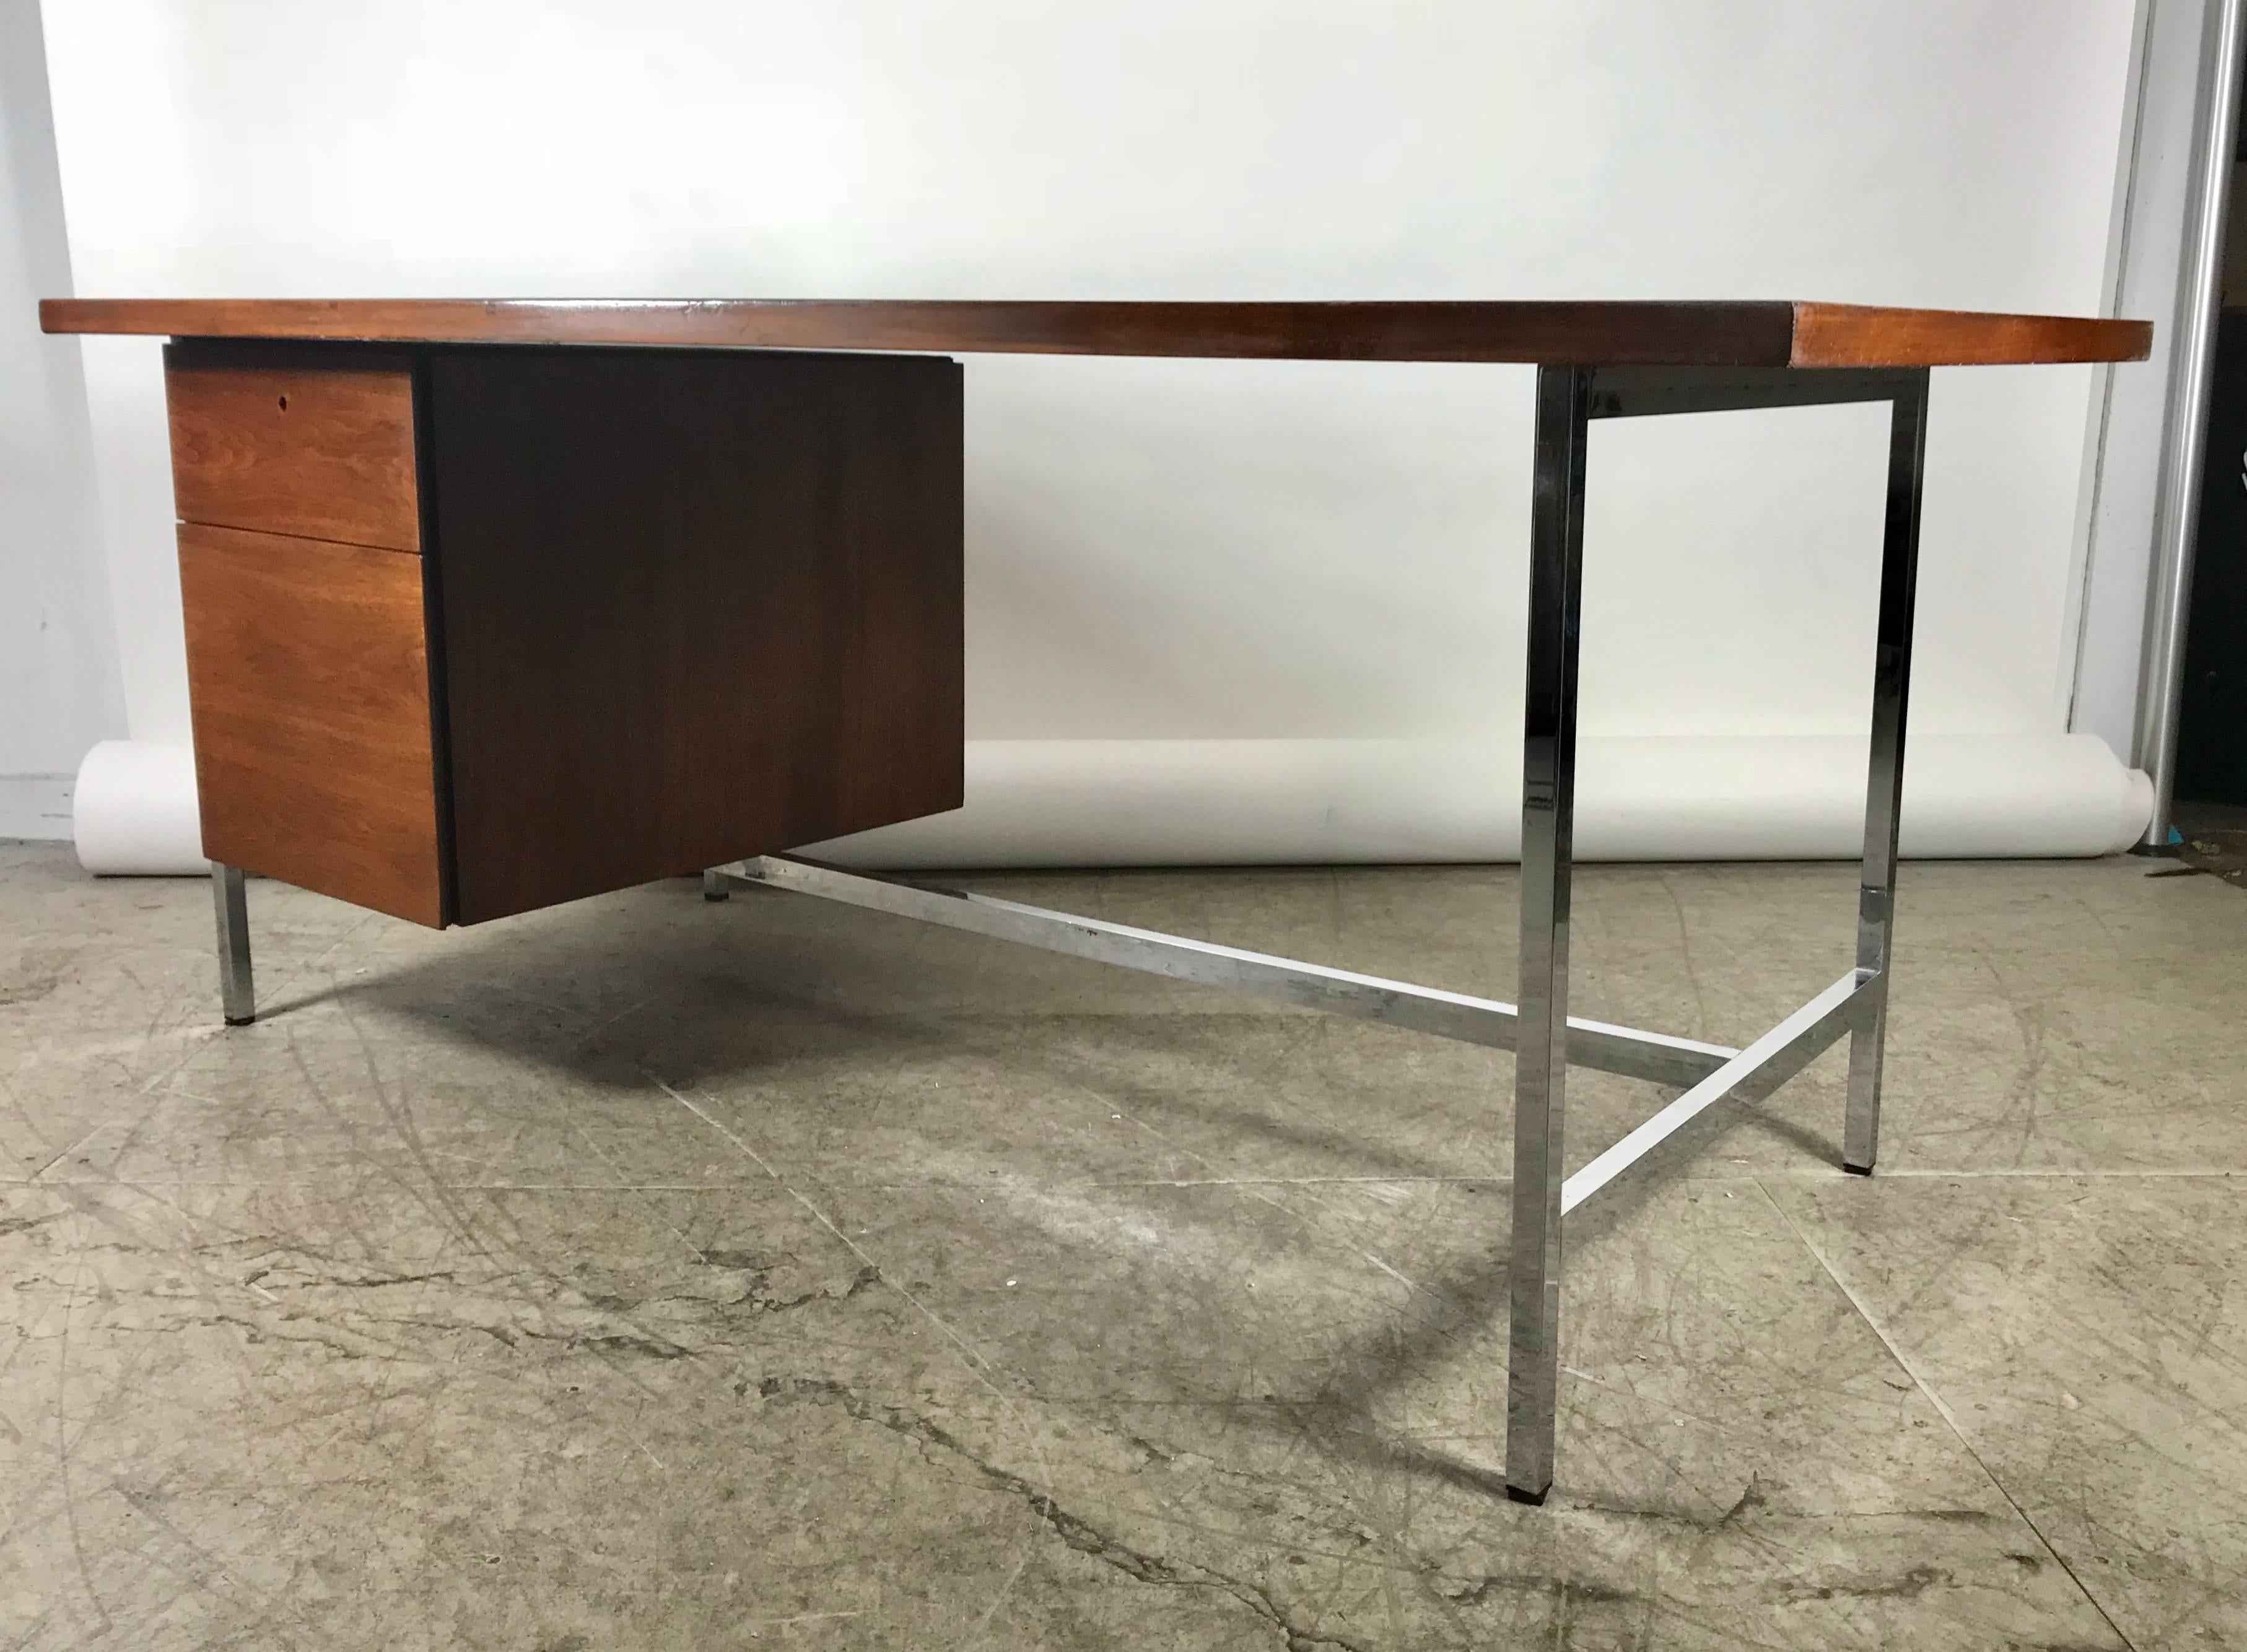 Classic midcentury walnut and chrome Florence Knoll desk features richly grained walnut top chromed steel frame, pencil drawer and file drawer. Retains early Knoll label.